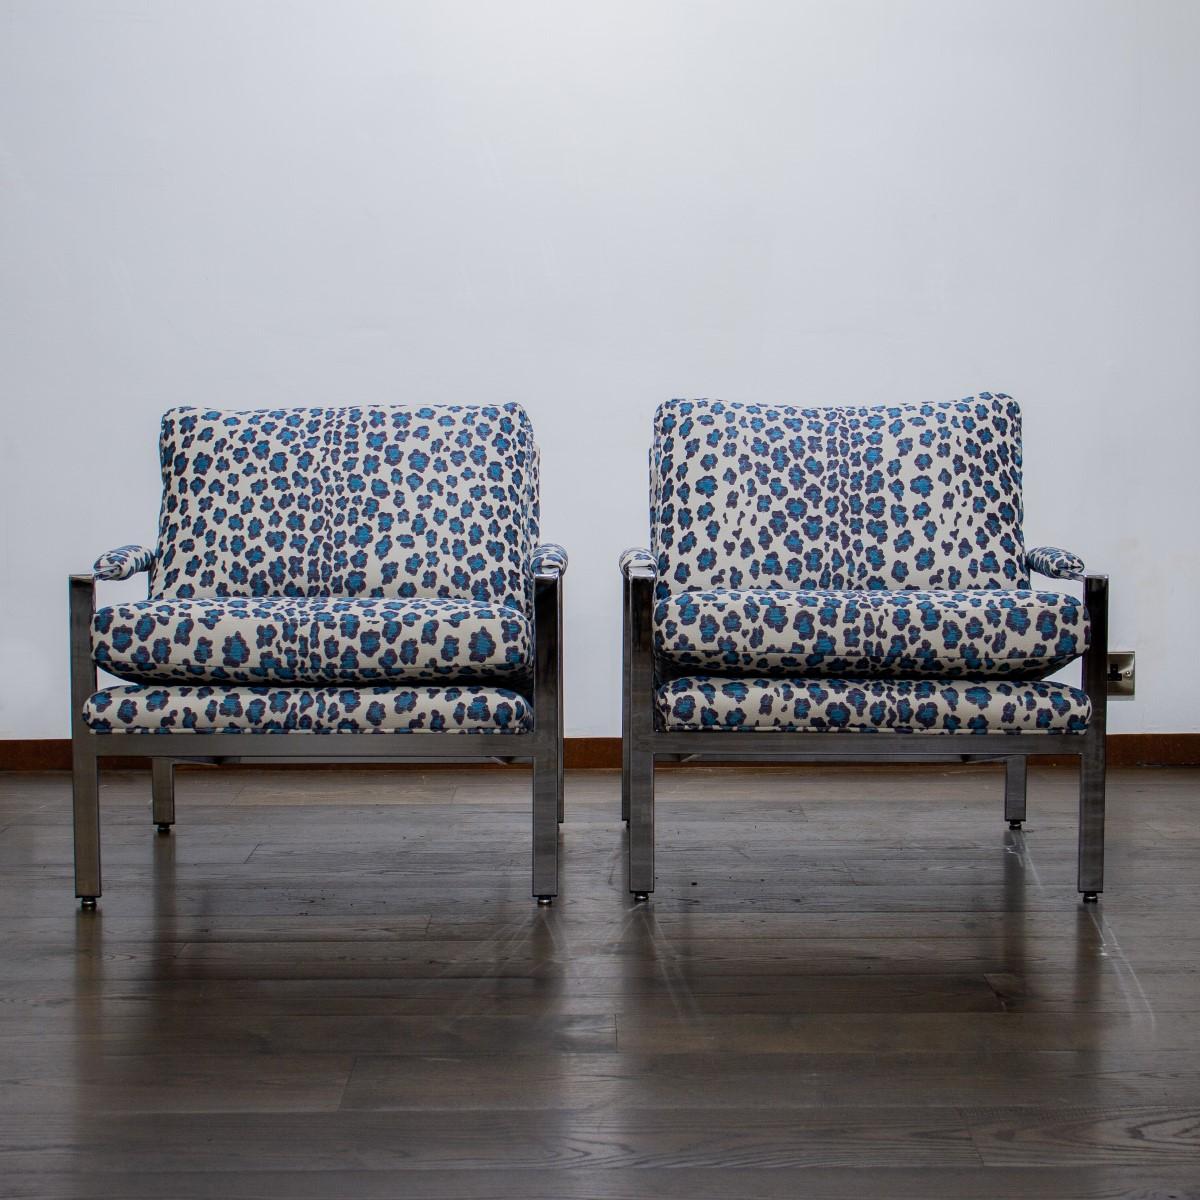 A pair of nickel framed armchairs designed by Milo Baughman, with sloping arms and seat upholstered in a modern blue leopard print fabric, 1970s.

Milo Baughman Design Inc was established in 1947. In 1948 he helped create the California Modern